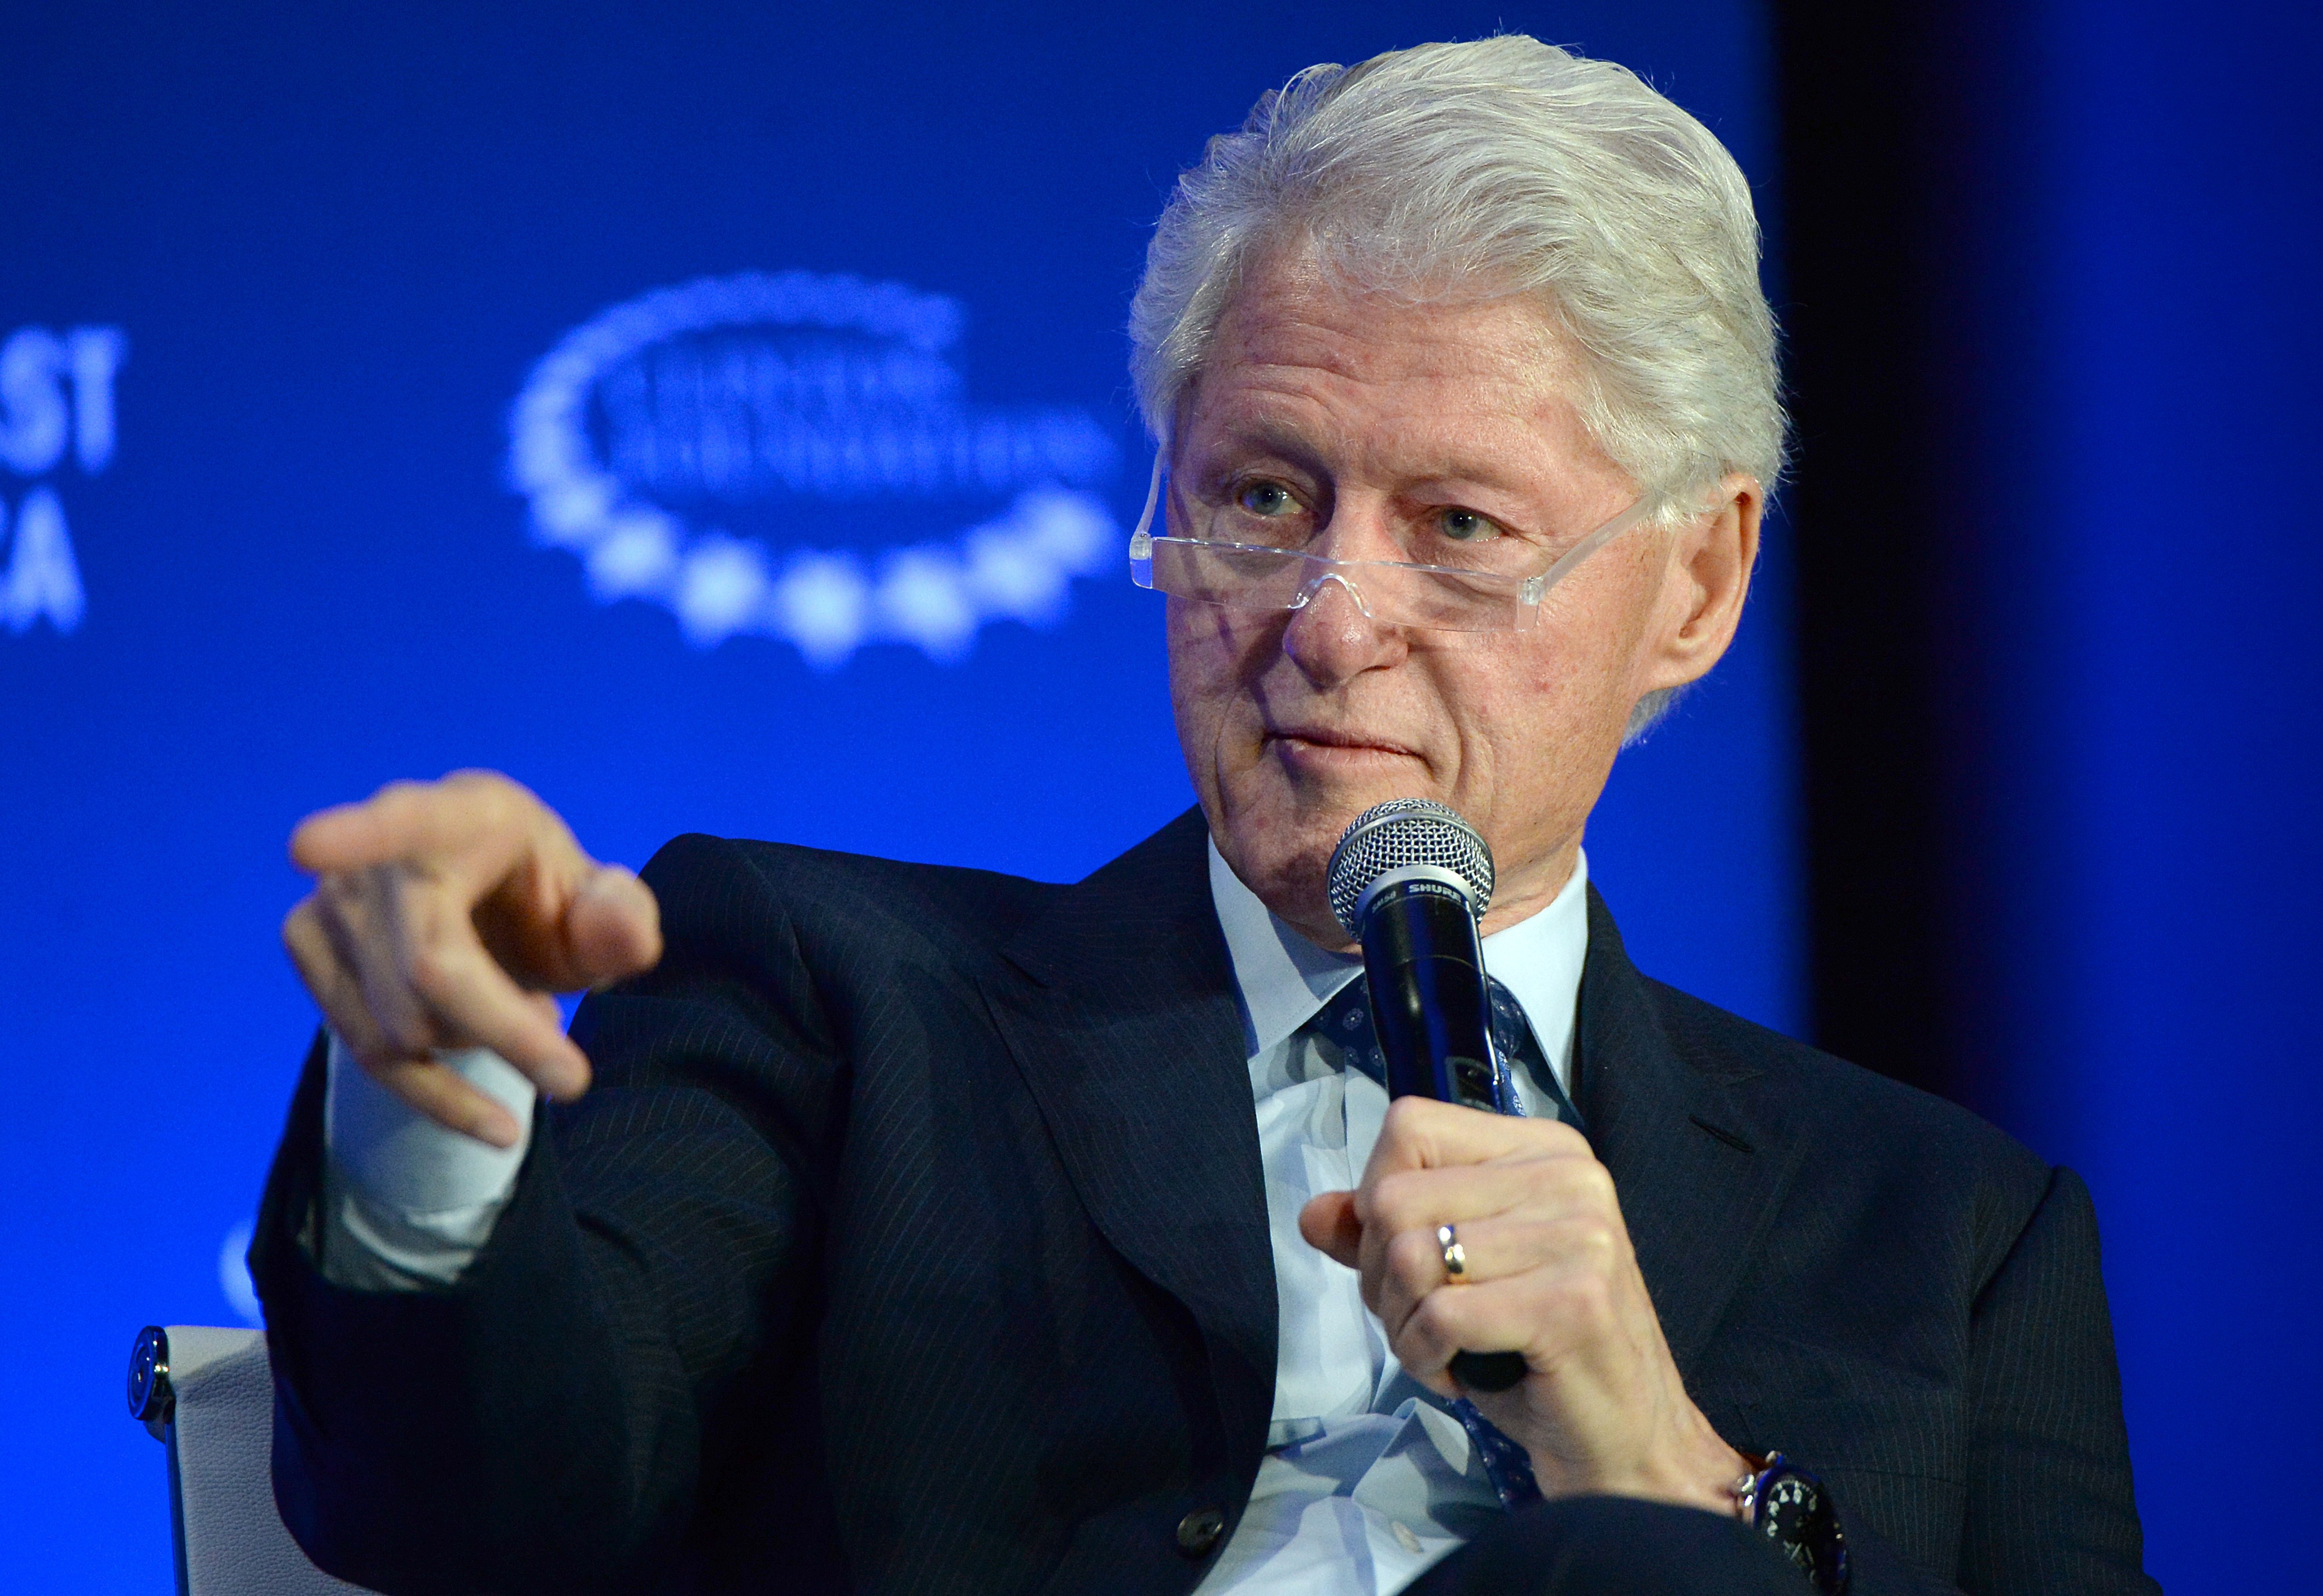 Former U.S. president and founding chairman of the Clinton Global Initiative (CGI), Bill Clinton, gestures during the opening session of the CGI Middle East and Africa in Marrakesh, Morocco on May 6, 2015 (Fadel Senna—/Getty Images)